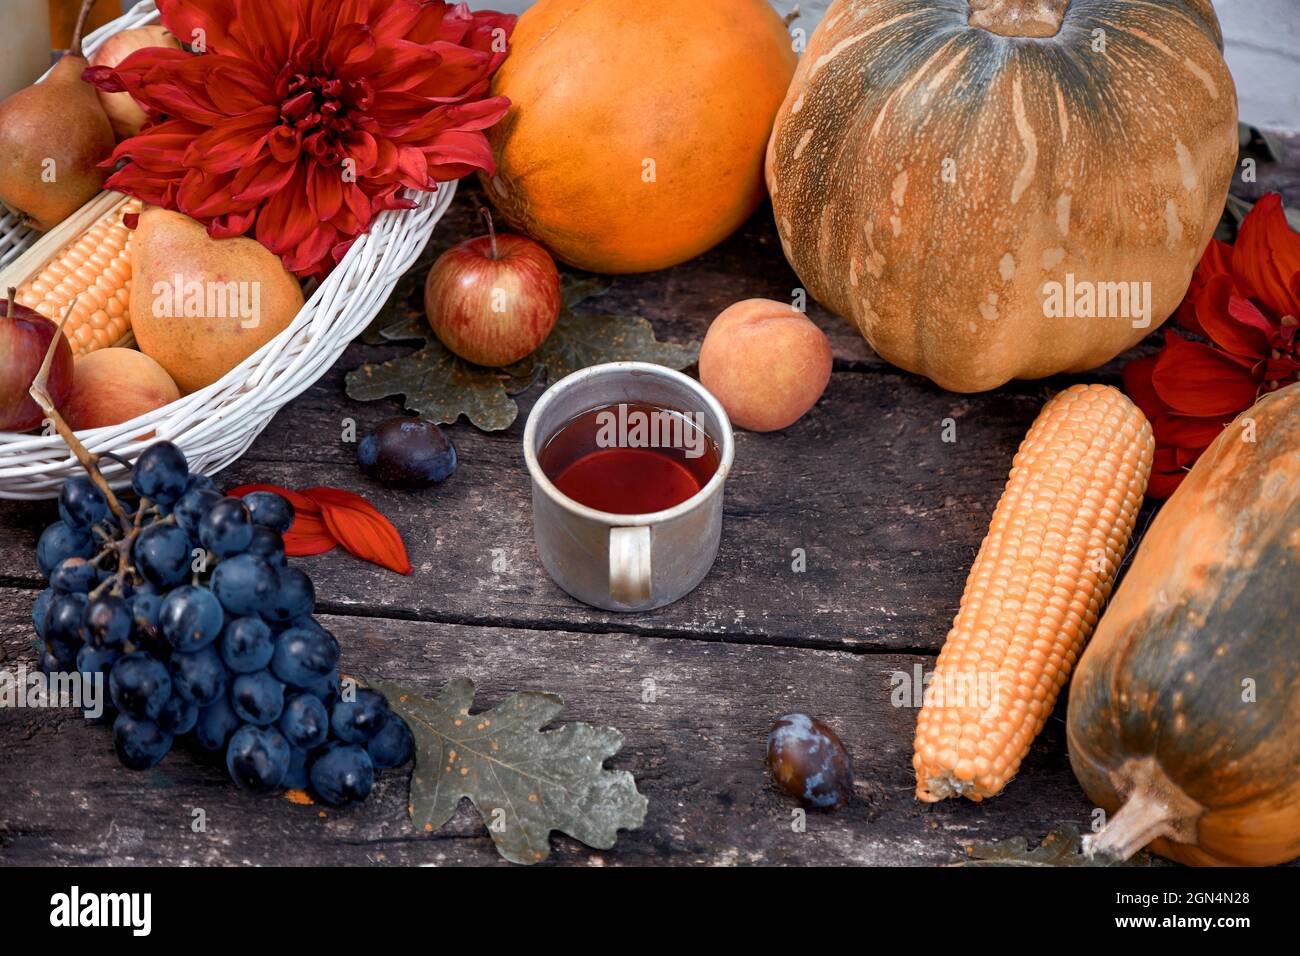 Cottagecore Aesthetic: fruits and vegetables: pumpkin, pears, apple and melon. Thanksgiving Day concept. Autumn still life with red dahlia and mug of tea. High quality photo Stock Photo